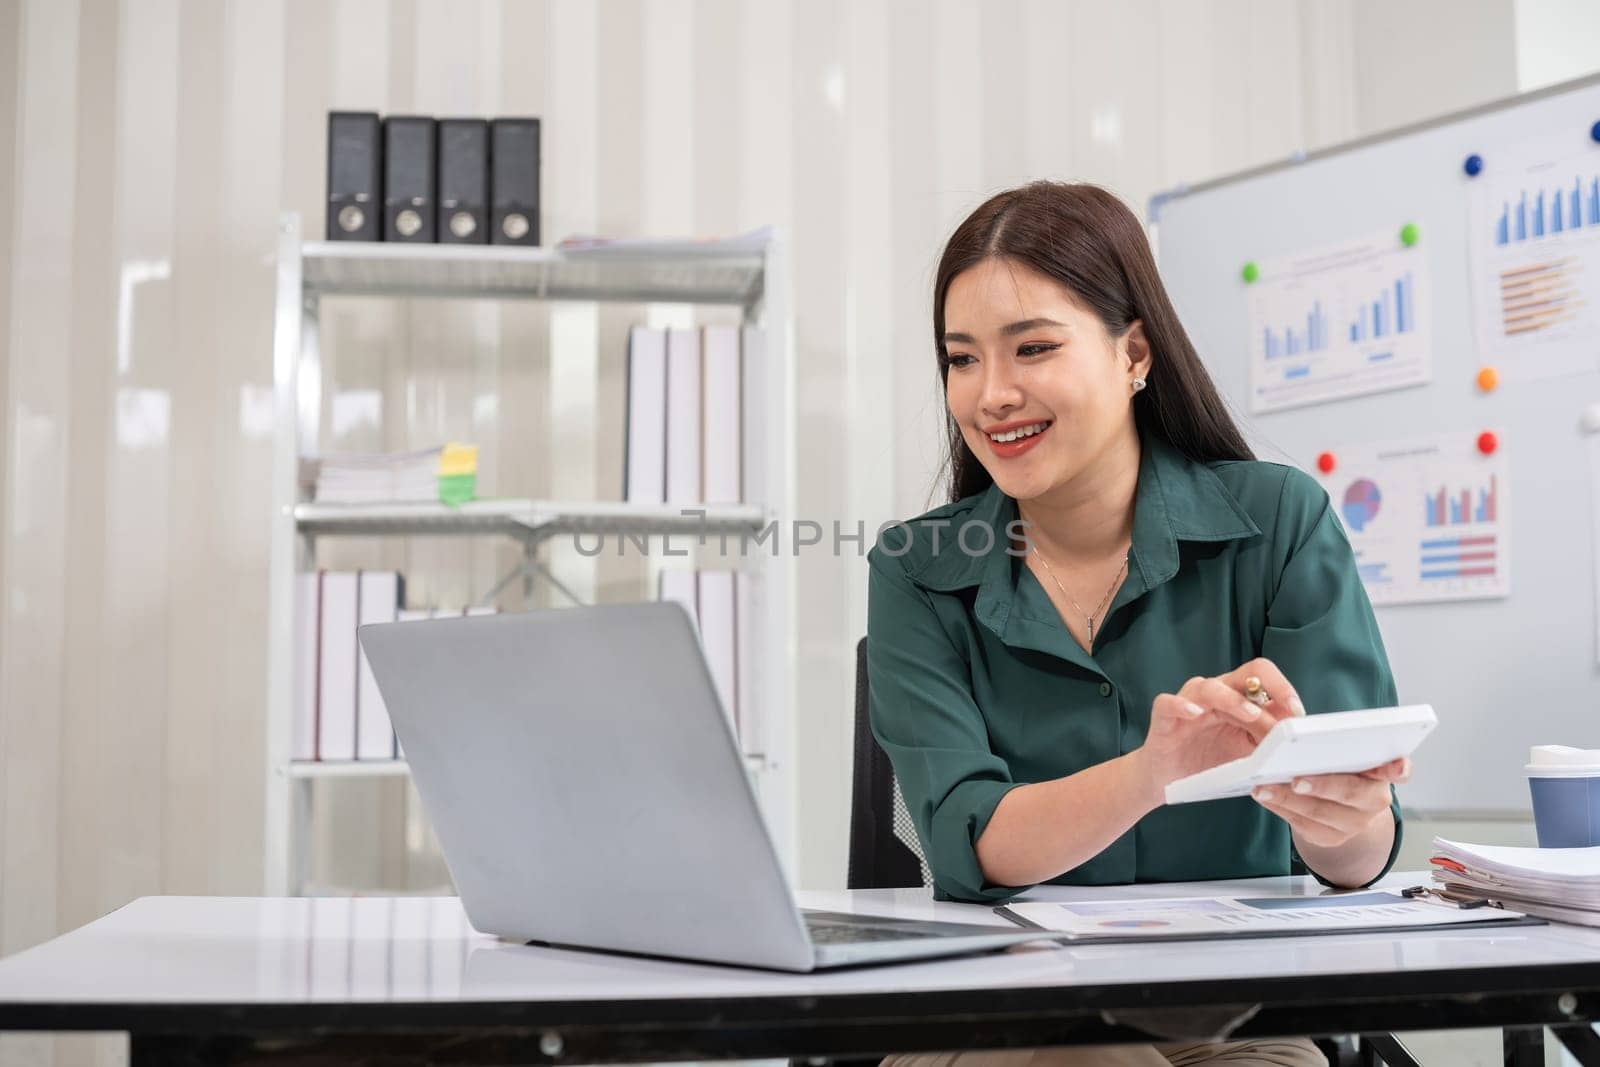 Asian businesswoman working on financial document with laptop on desk in office room.